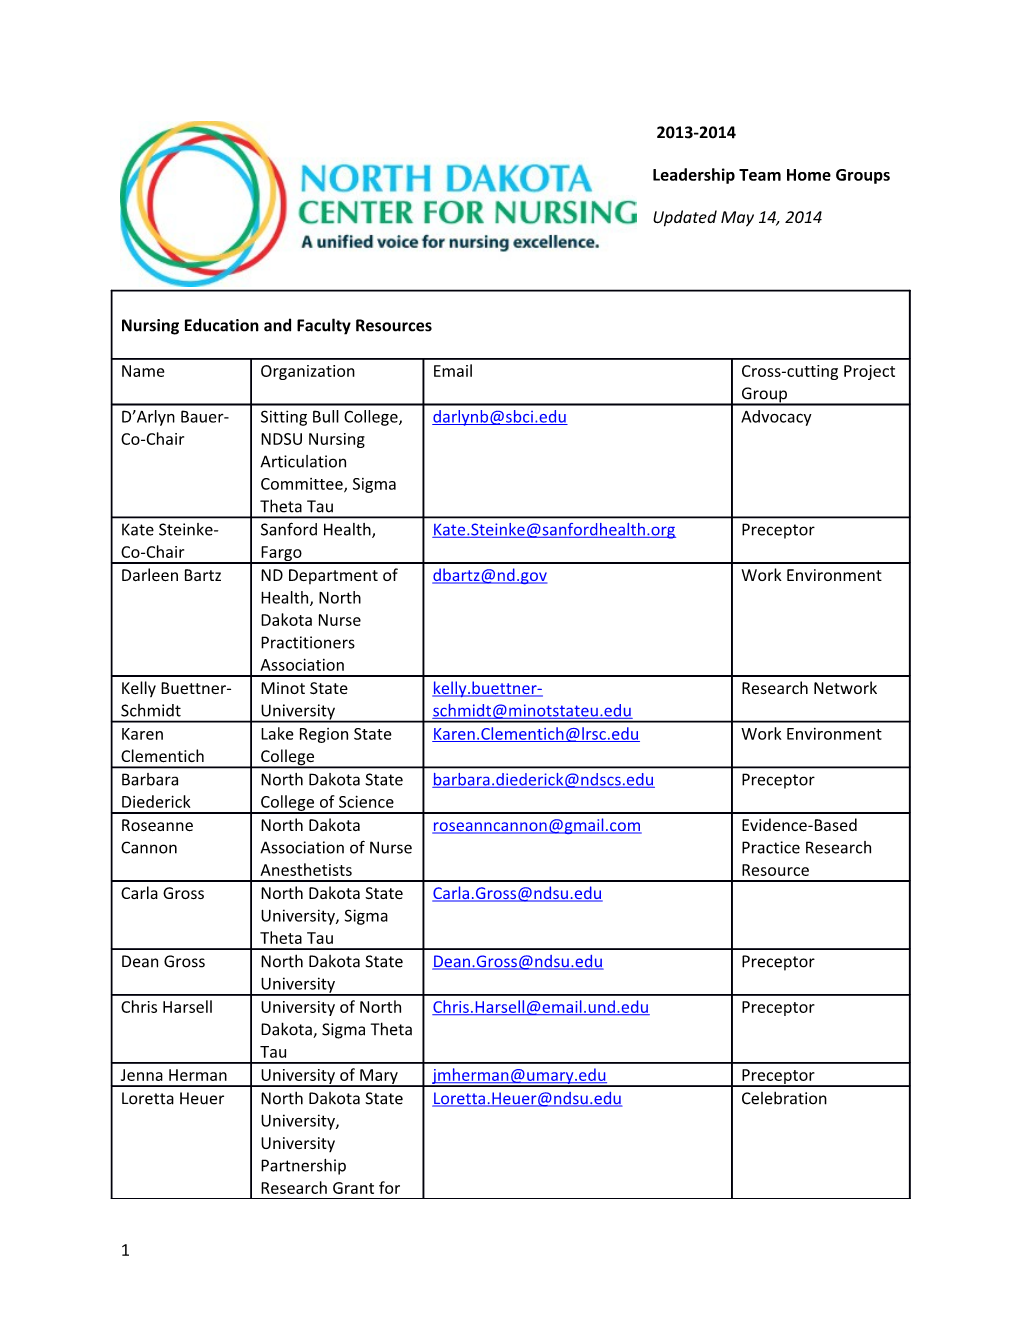 ND Center for Nursing Cross-Cutting Project Groups